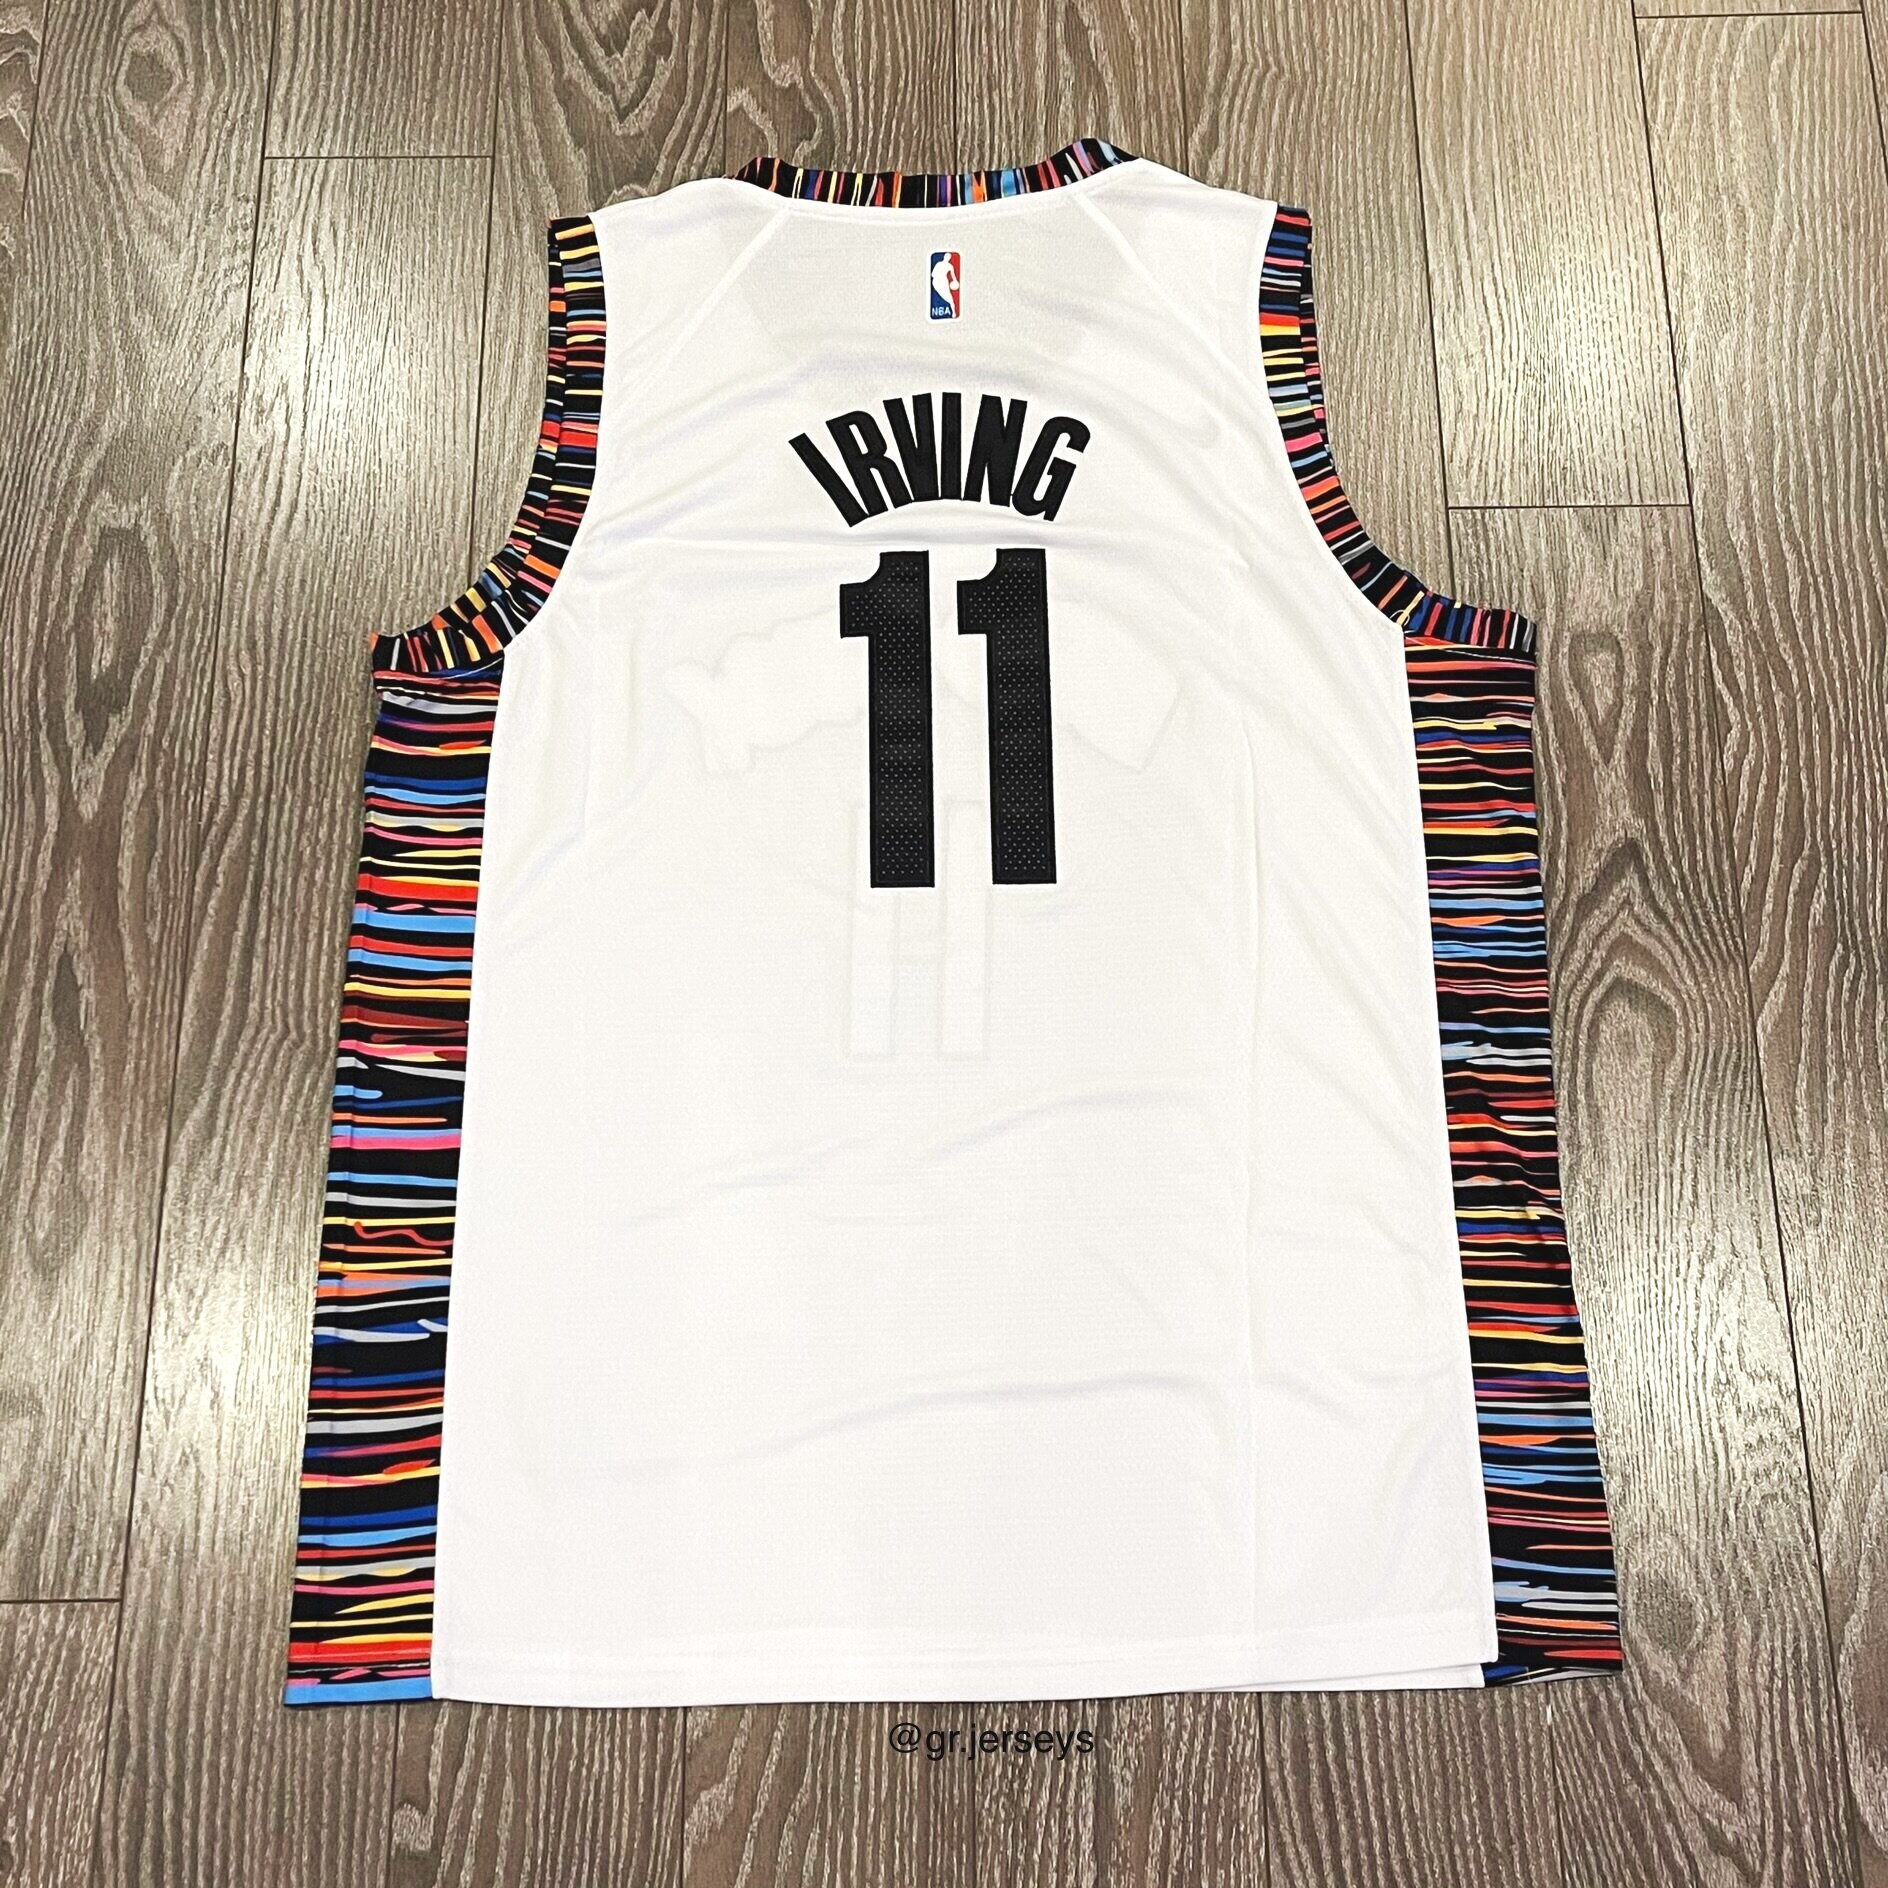 Kyrie Irving 2019-20 Brooklyn Nets Bed-Stuy City Edition Authentic Jersey  48+2